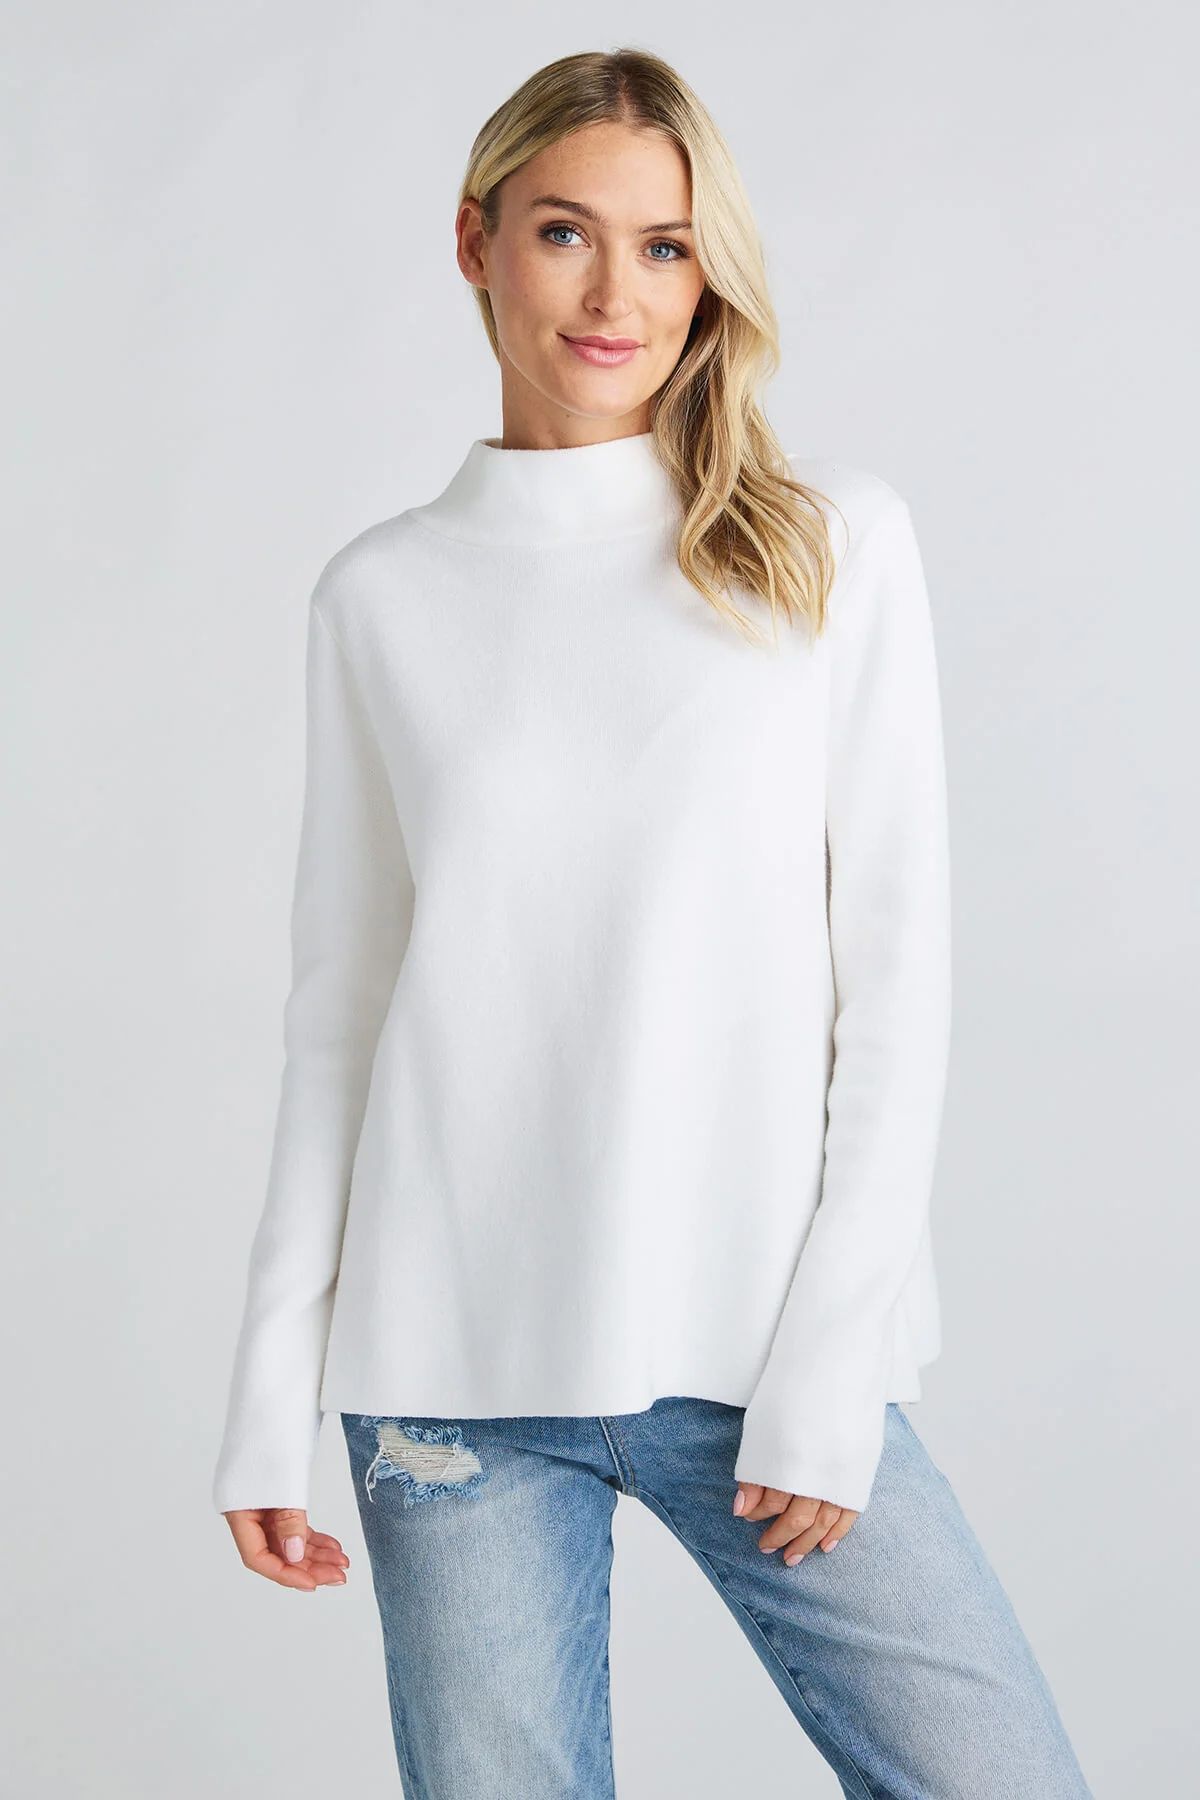 Fate Exclusive Mockneck Slim Sleeve Sweater | Social Threads